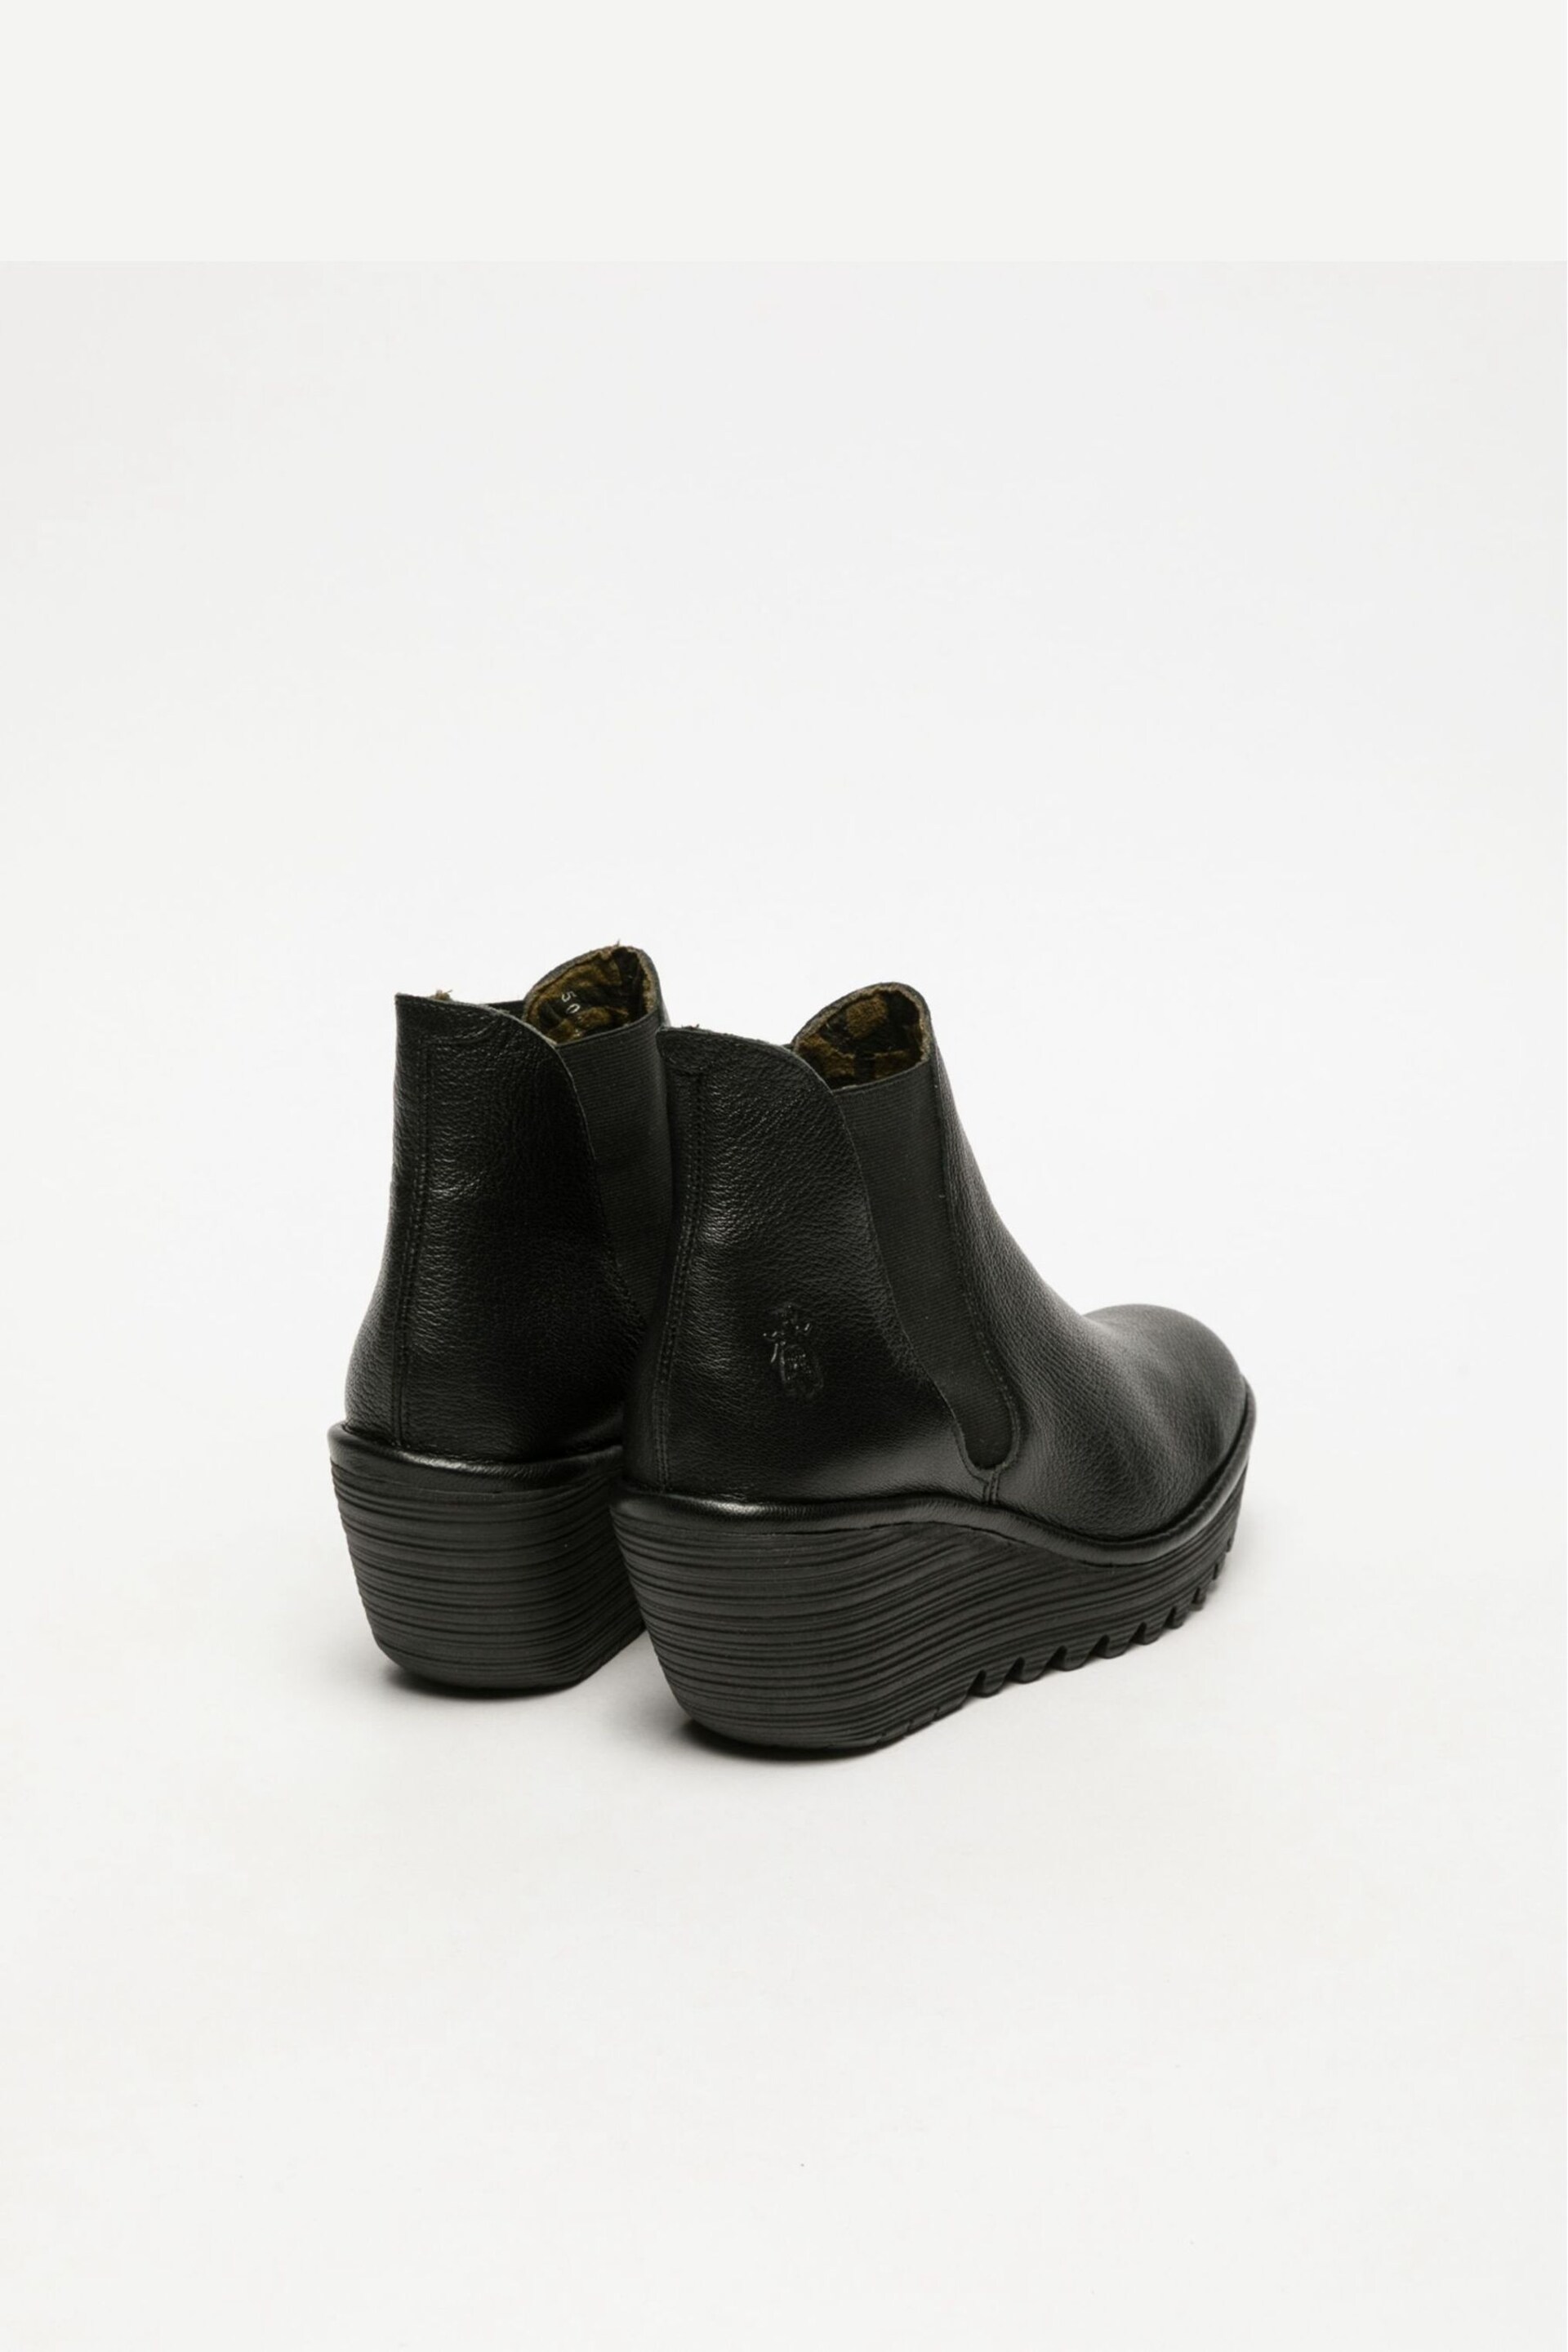 Fly London Wedge Ankle Boots - Image 4 of 5